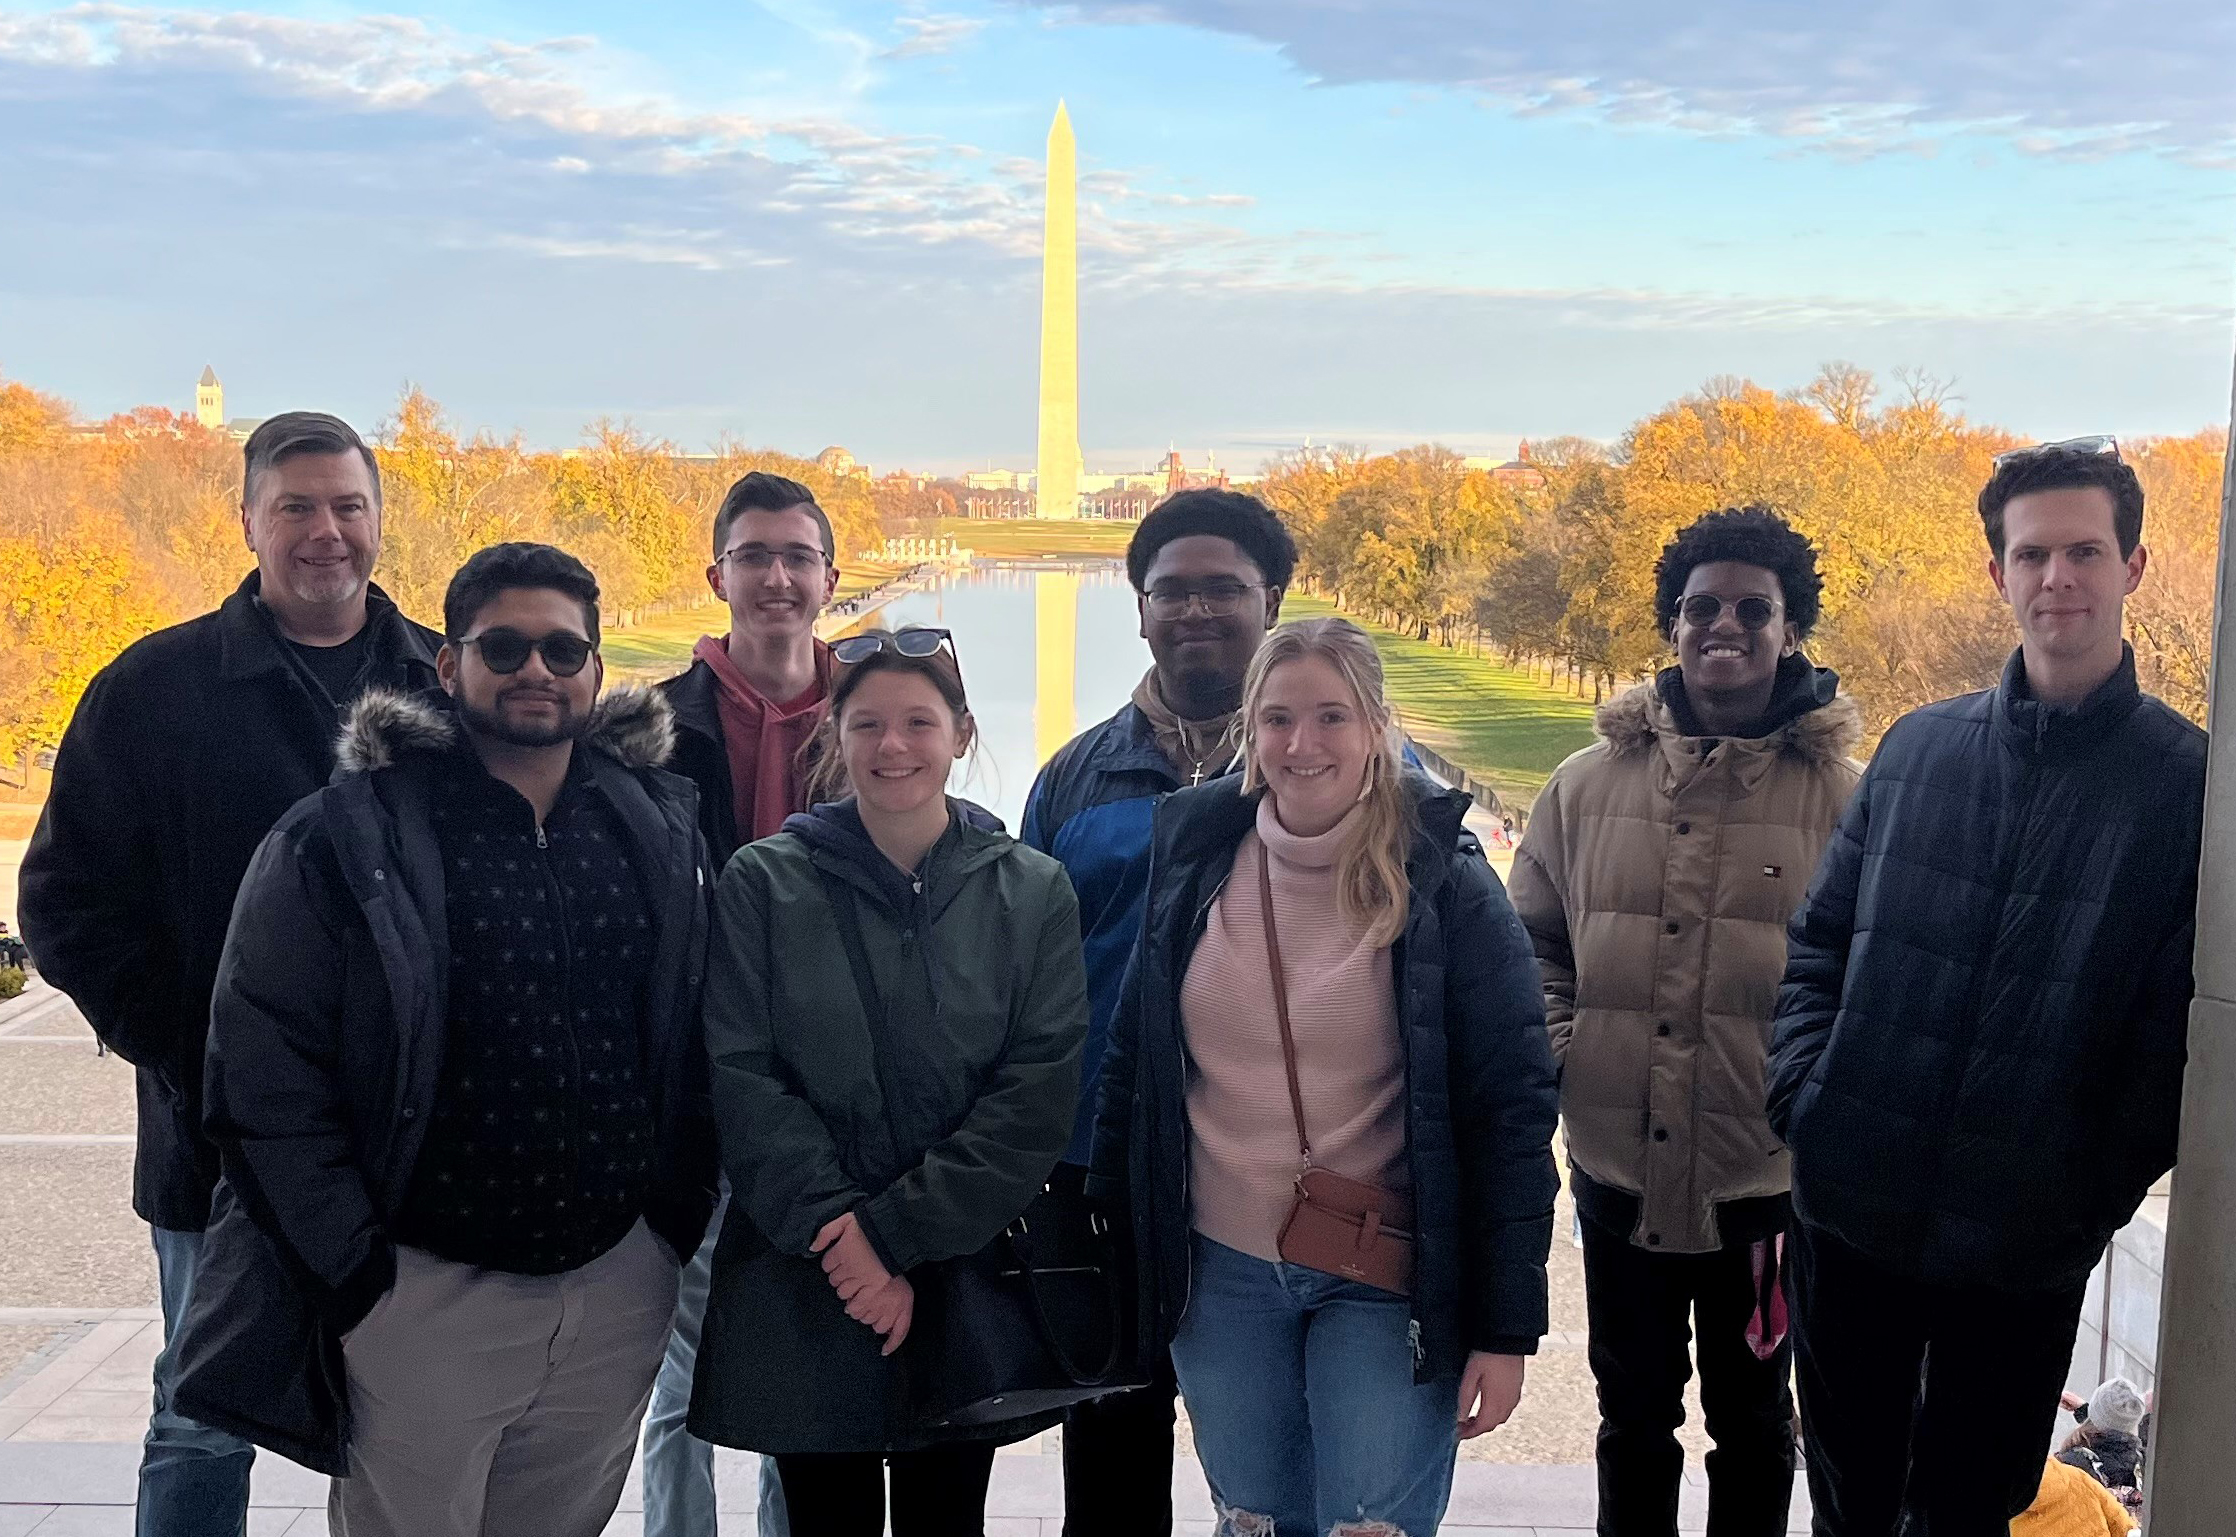 Students visited the sites around Washington DC during their trip.